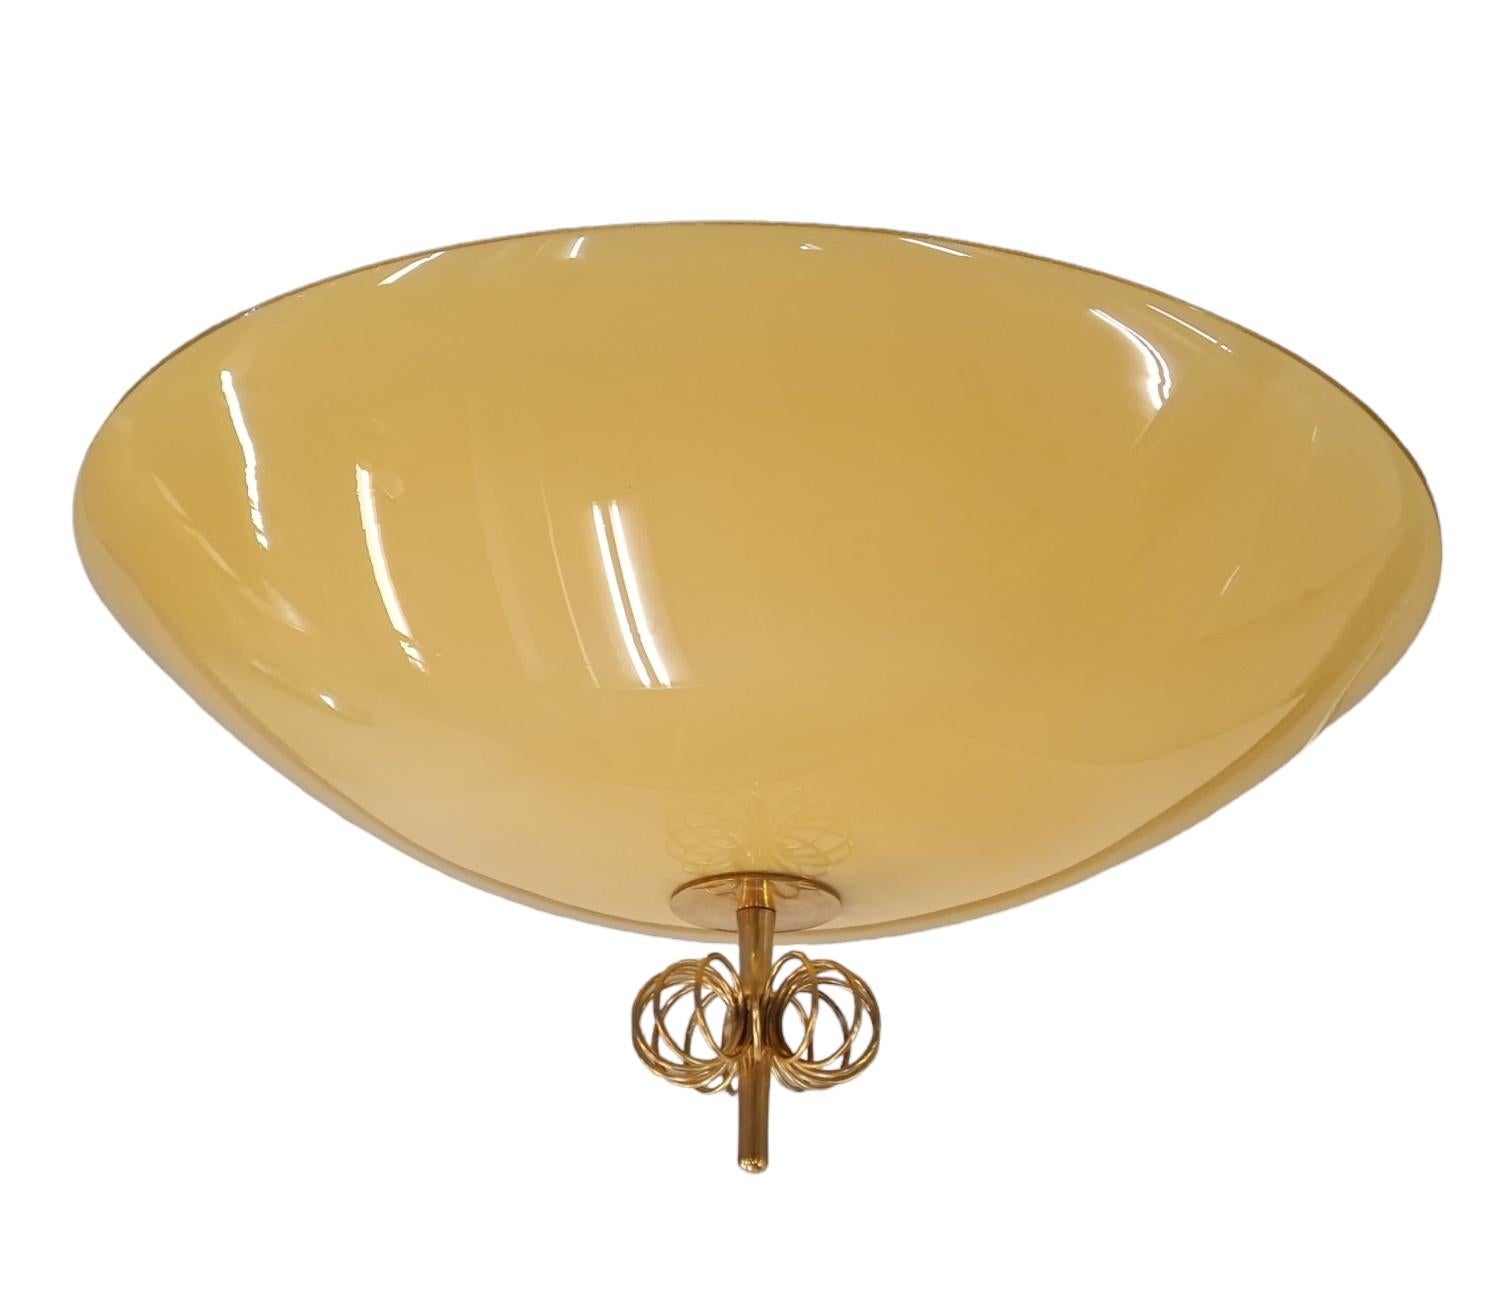 Finnish Paavo Tynell Ceiling Lamp Model Number 2093 For Idman. For Sale